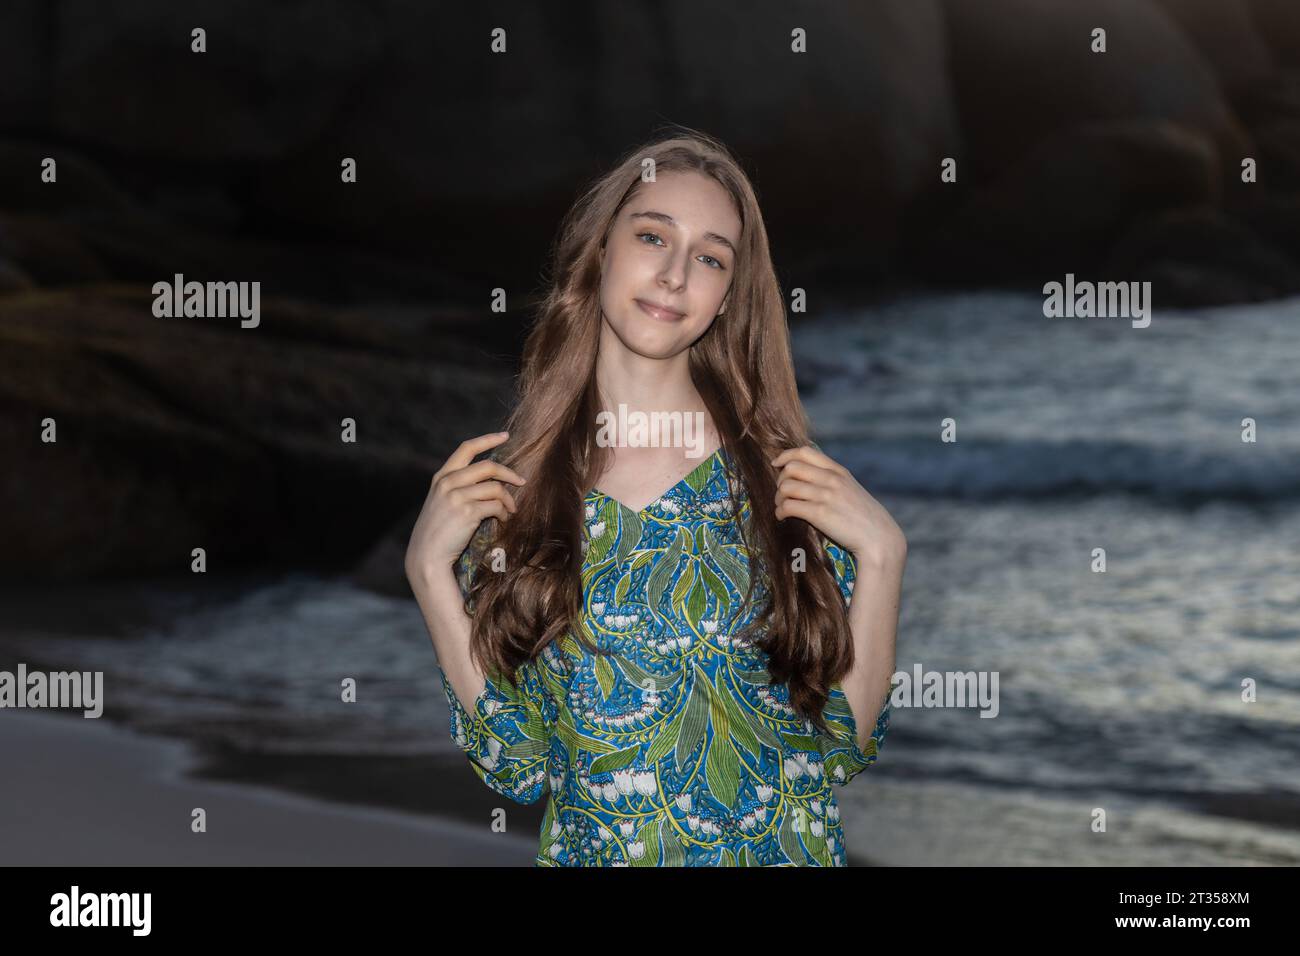 An elegant 20-year-old Caucasian woman with long flowing hair exudes grace in a close-up shot, donned in a green patterned shirt dress on the beach Stock Photo